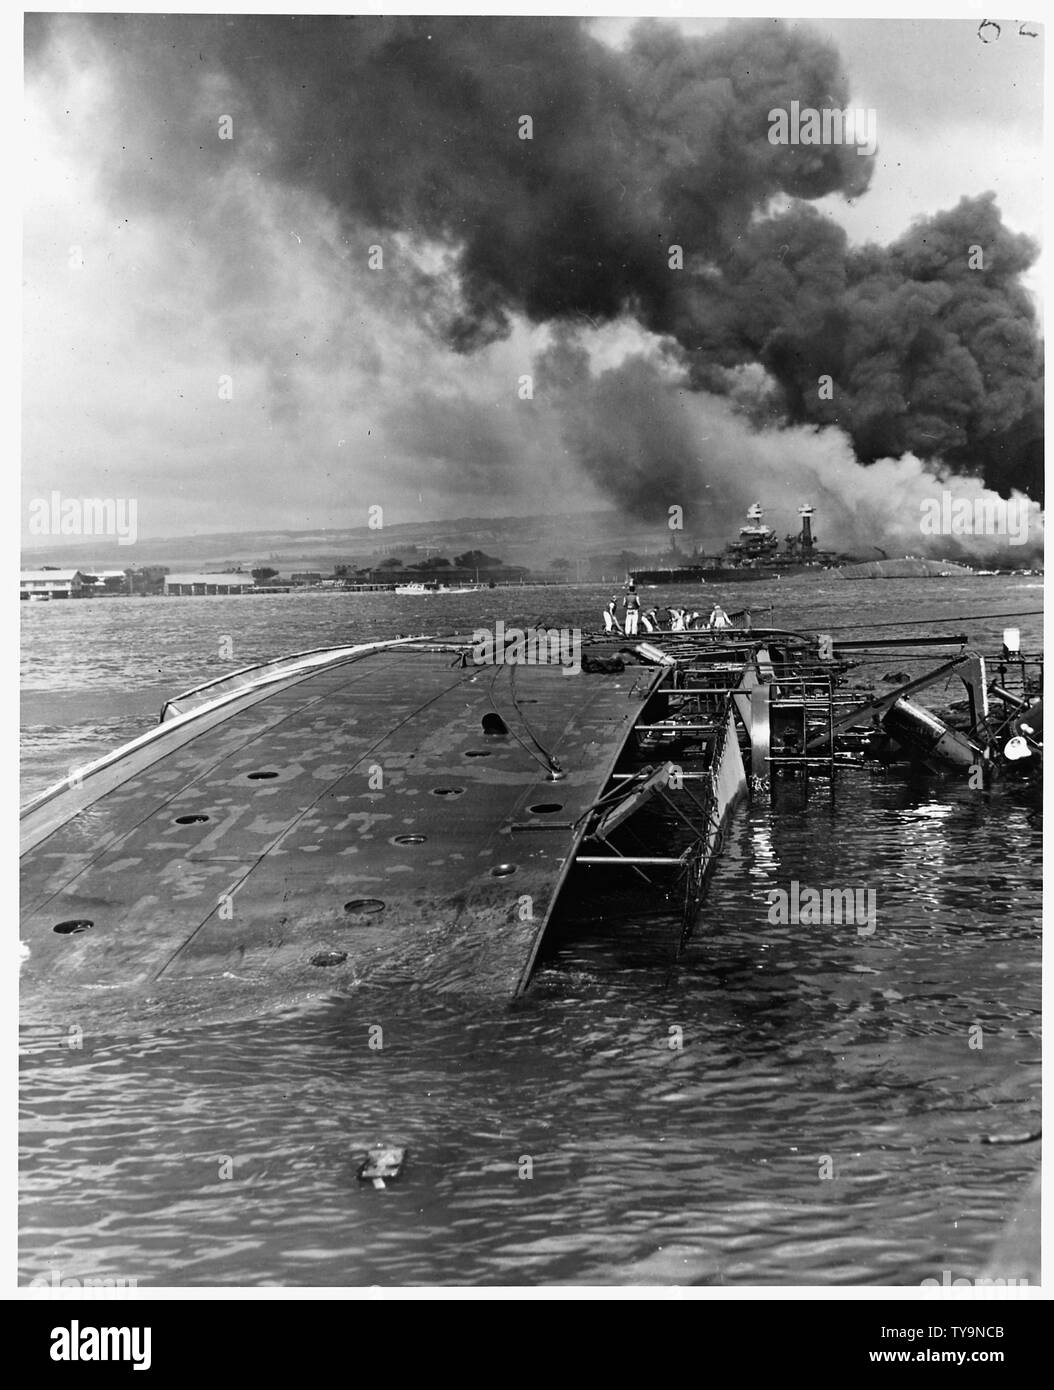 Naval photograph documenting the Japanese attack on Pearl Harbor, Hawaii which initiated US participation in World War II. Navy's caption: The USS OGLALA capsized after being attacked by Japanese aircraft and submarines in the attack on Pearl Harbor; Scope and content:  This photograph was originally taken by a Naval photographer immediately after the Japanese attack on Pearl Harbor, but came to be filed in a writ of application for habeas corpus case (number 298) tried in the US District Court, District of Hawaii in 1944. The case, In Re Lloyd C. Duncan related to imposition of martial law in Stock Photo